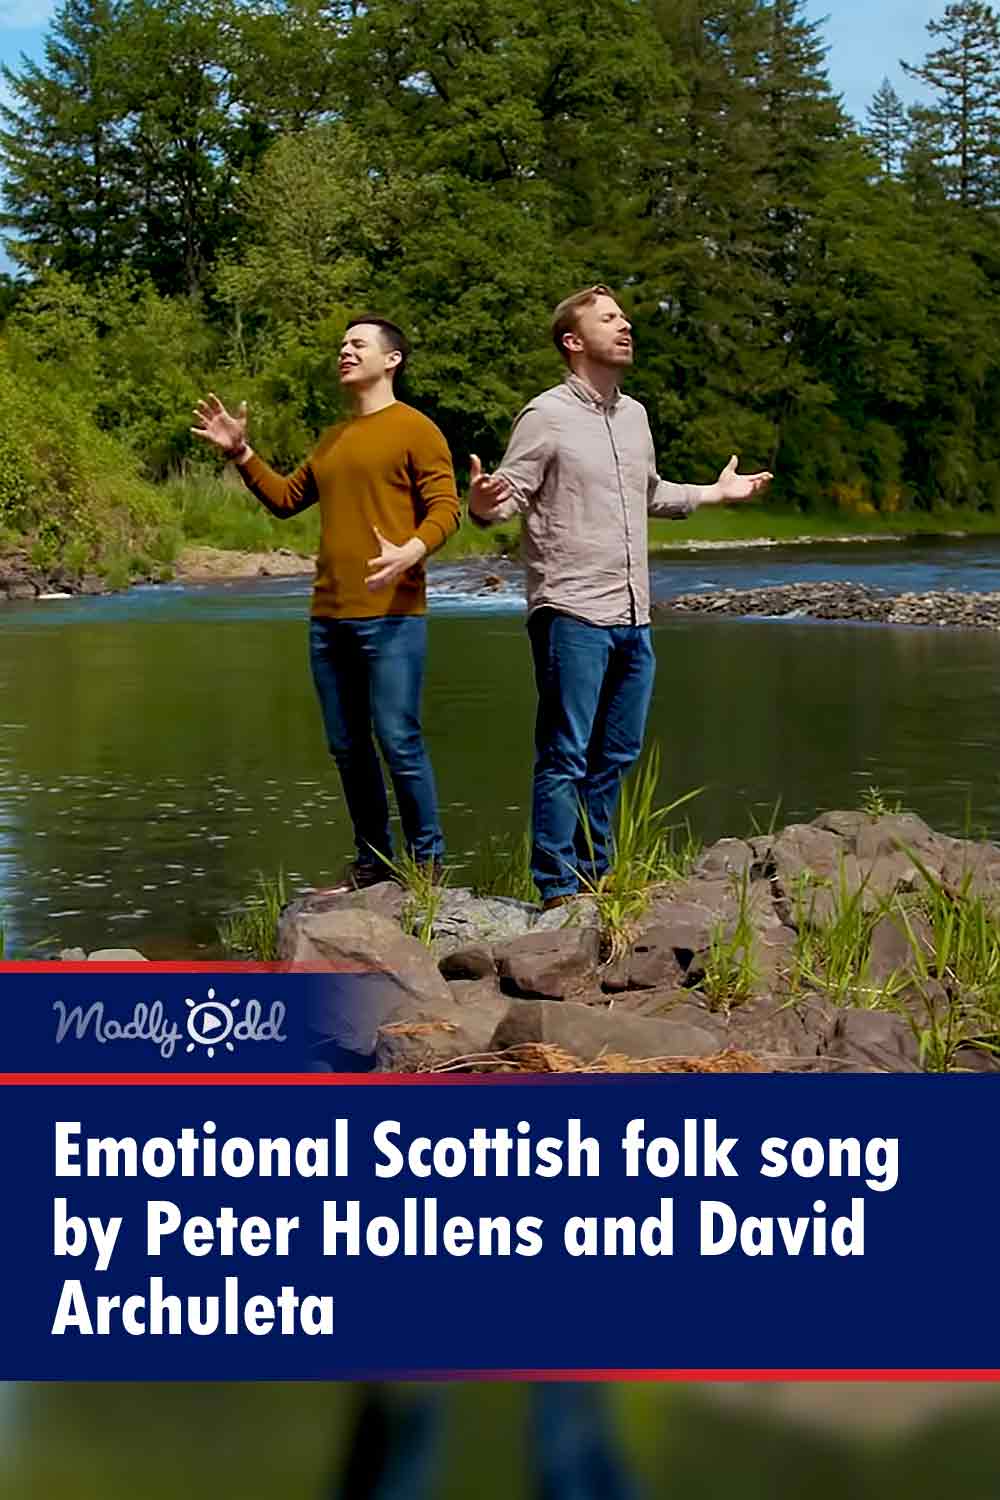 Emotional Scottish folk song by Peter Hollens and David Archuleta